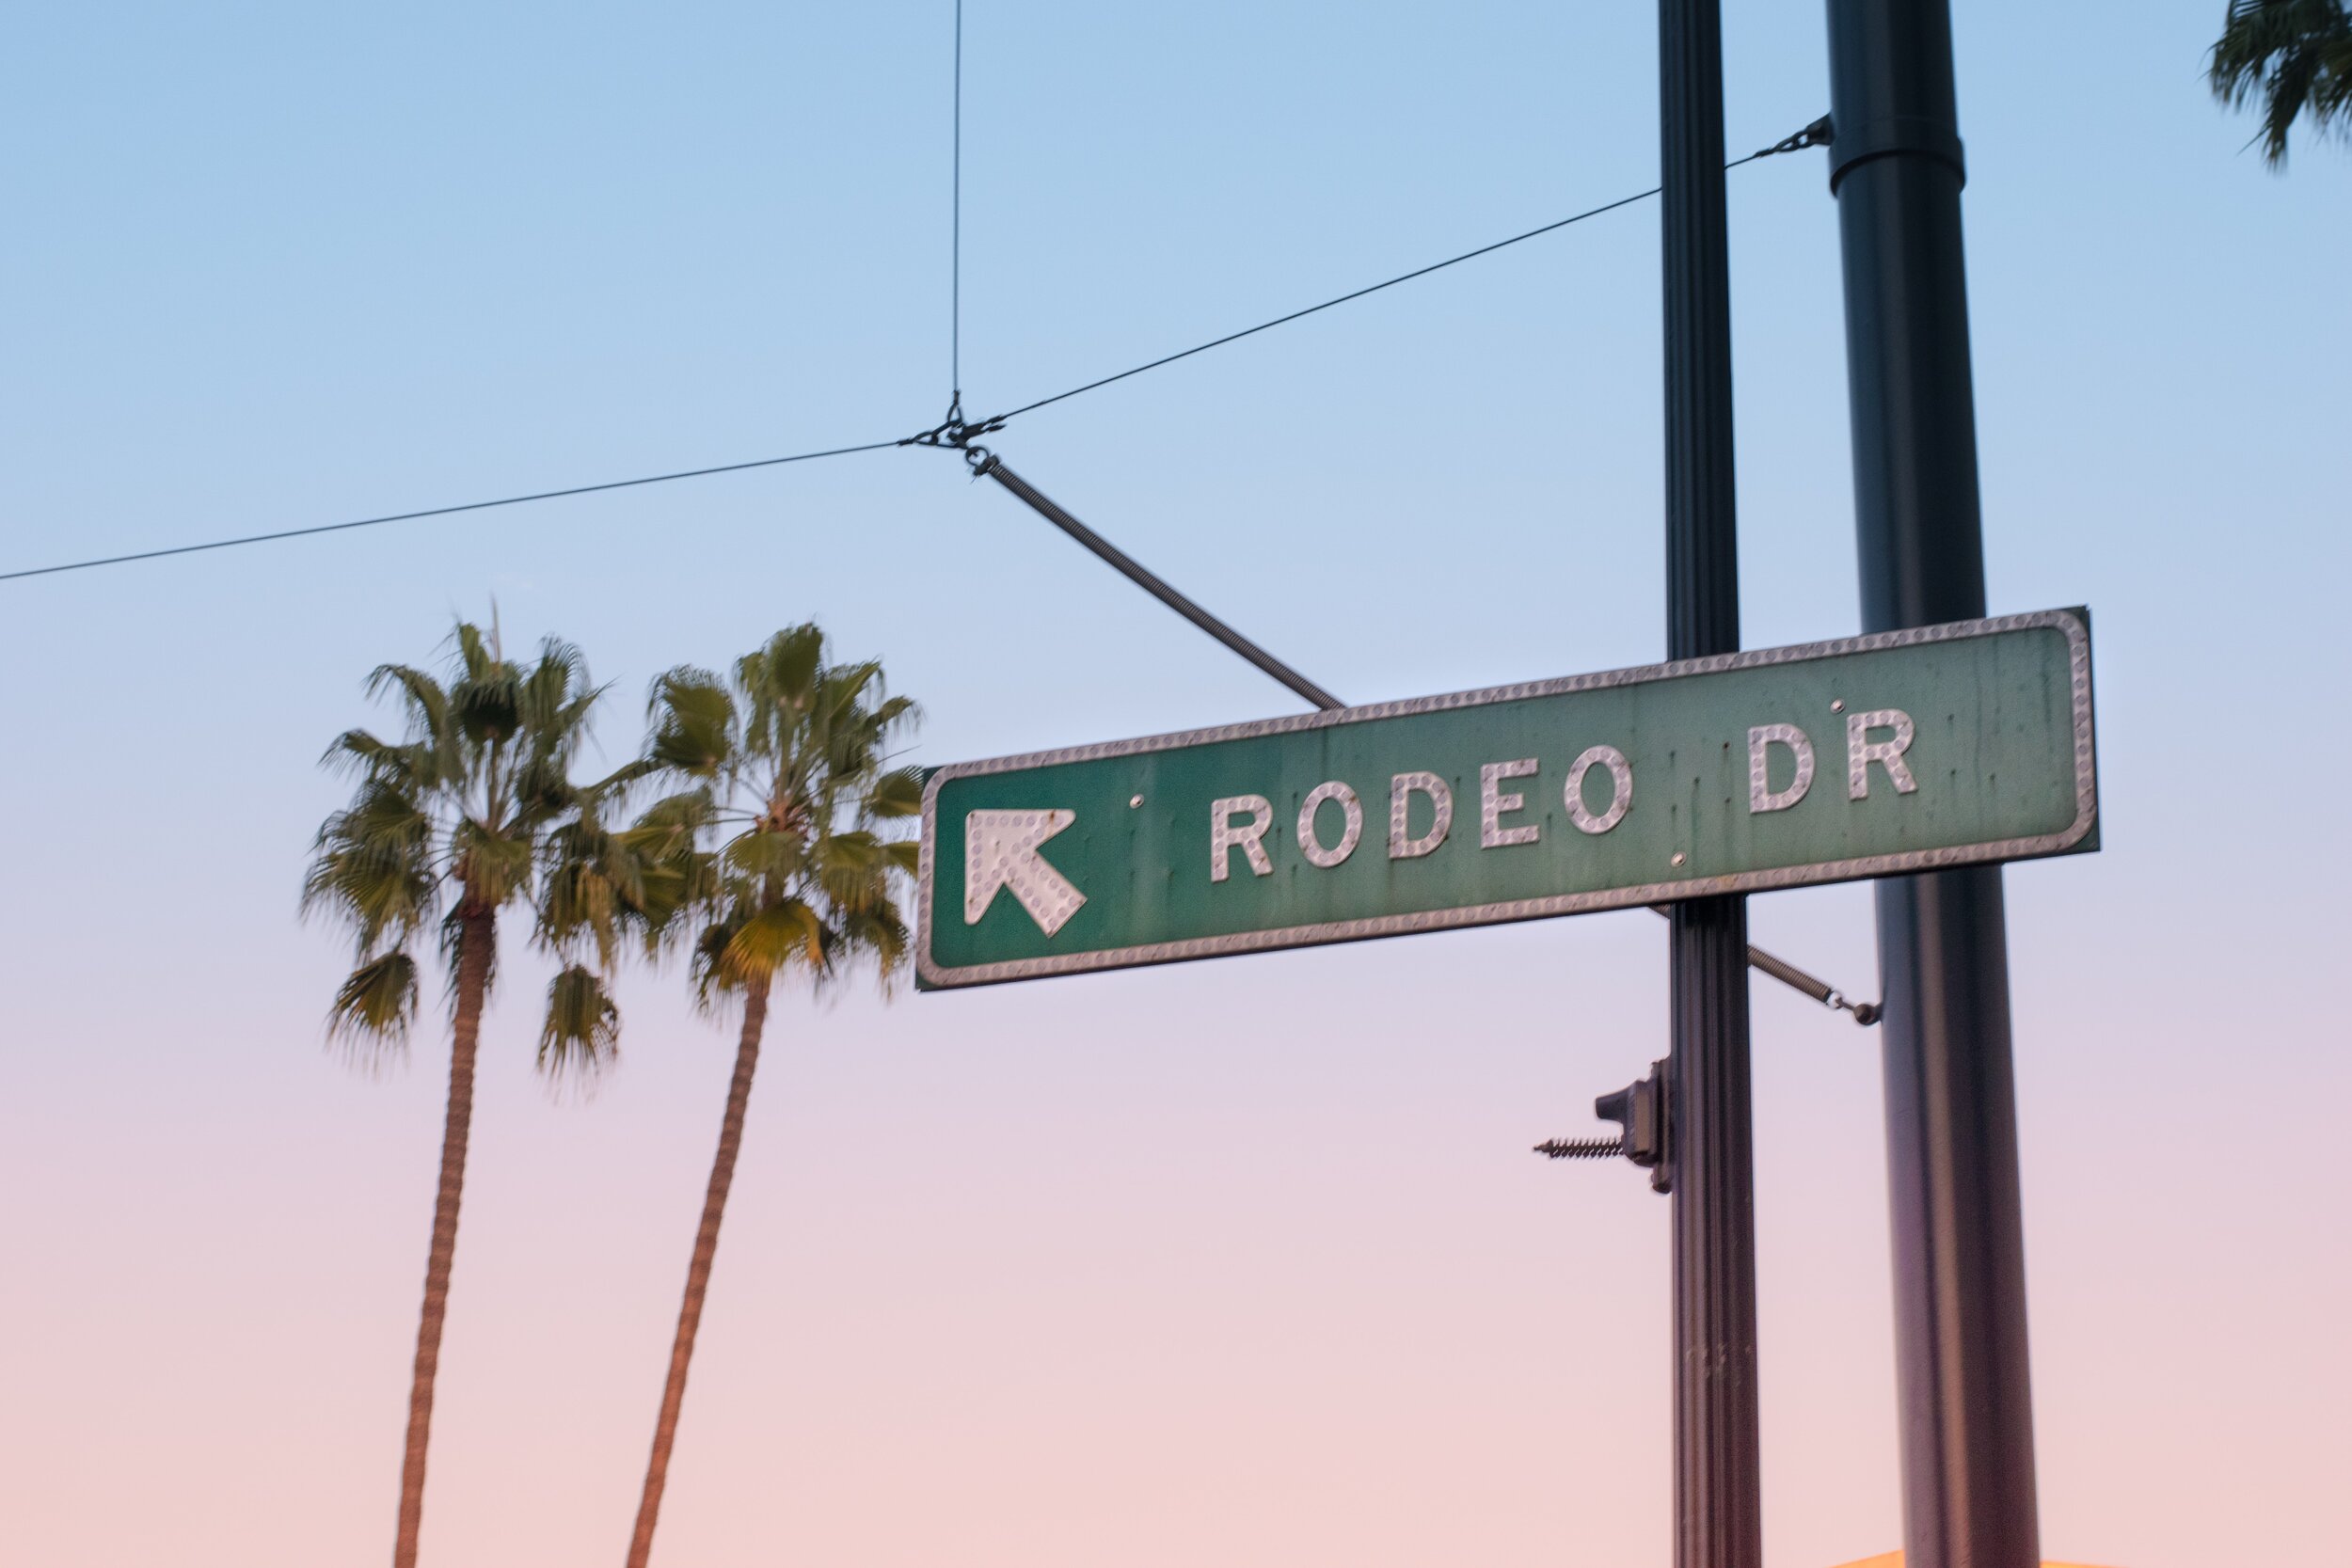 Rodeo Drive street sign and palm trees